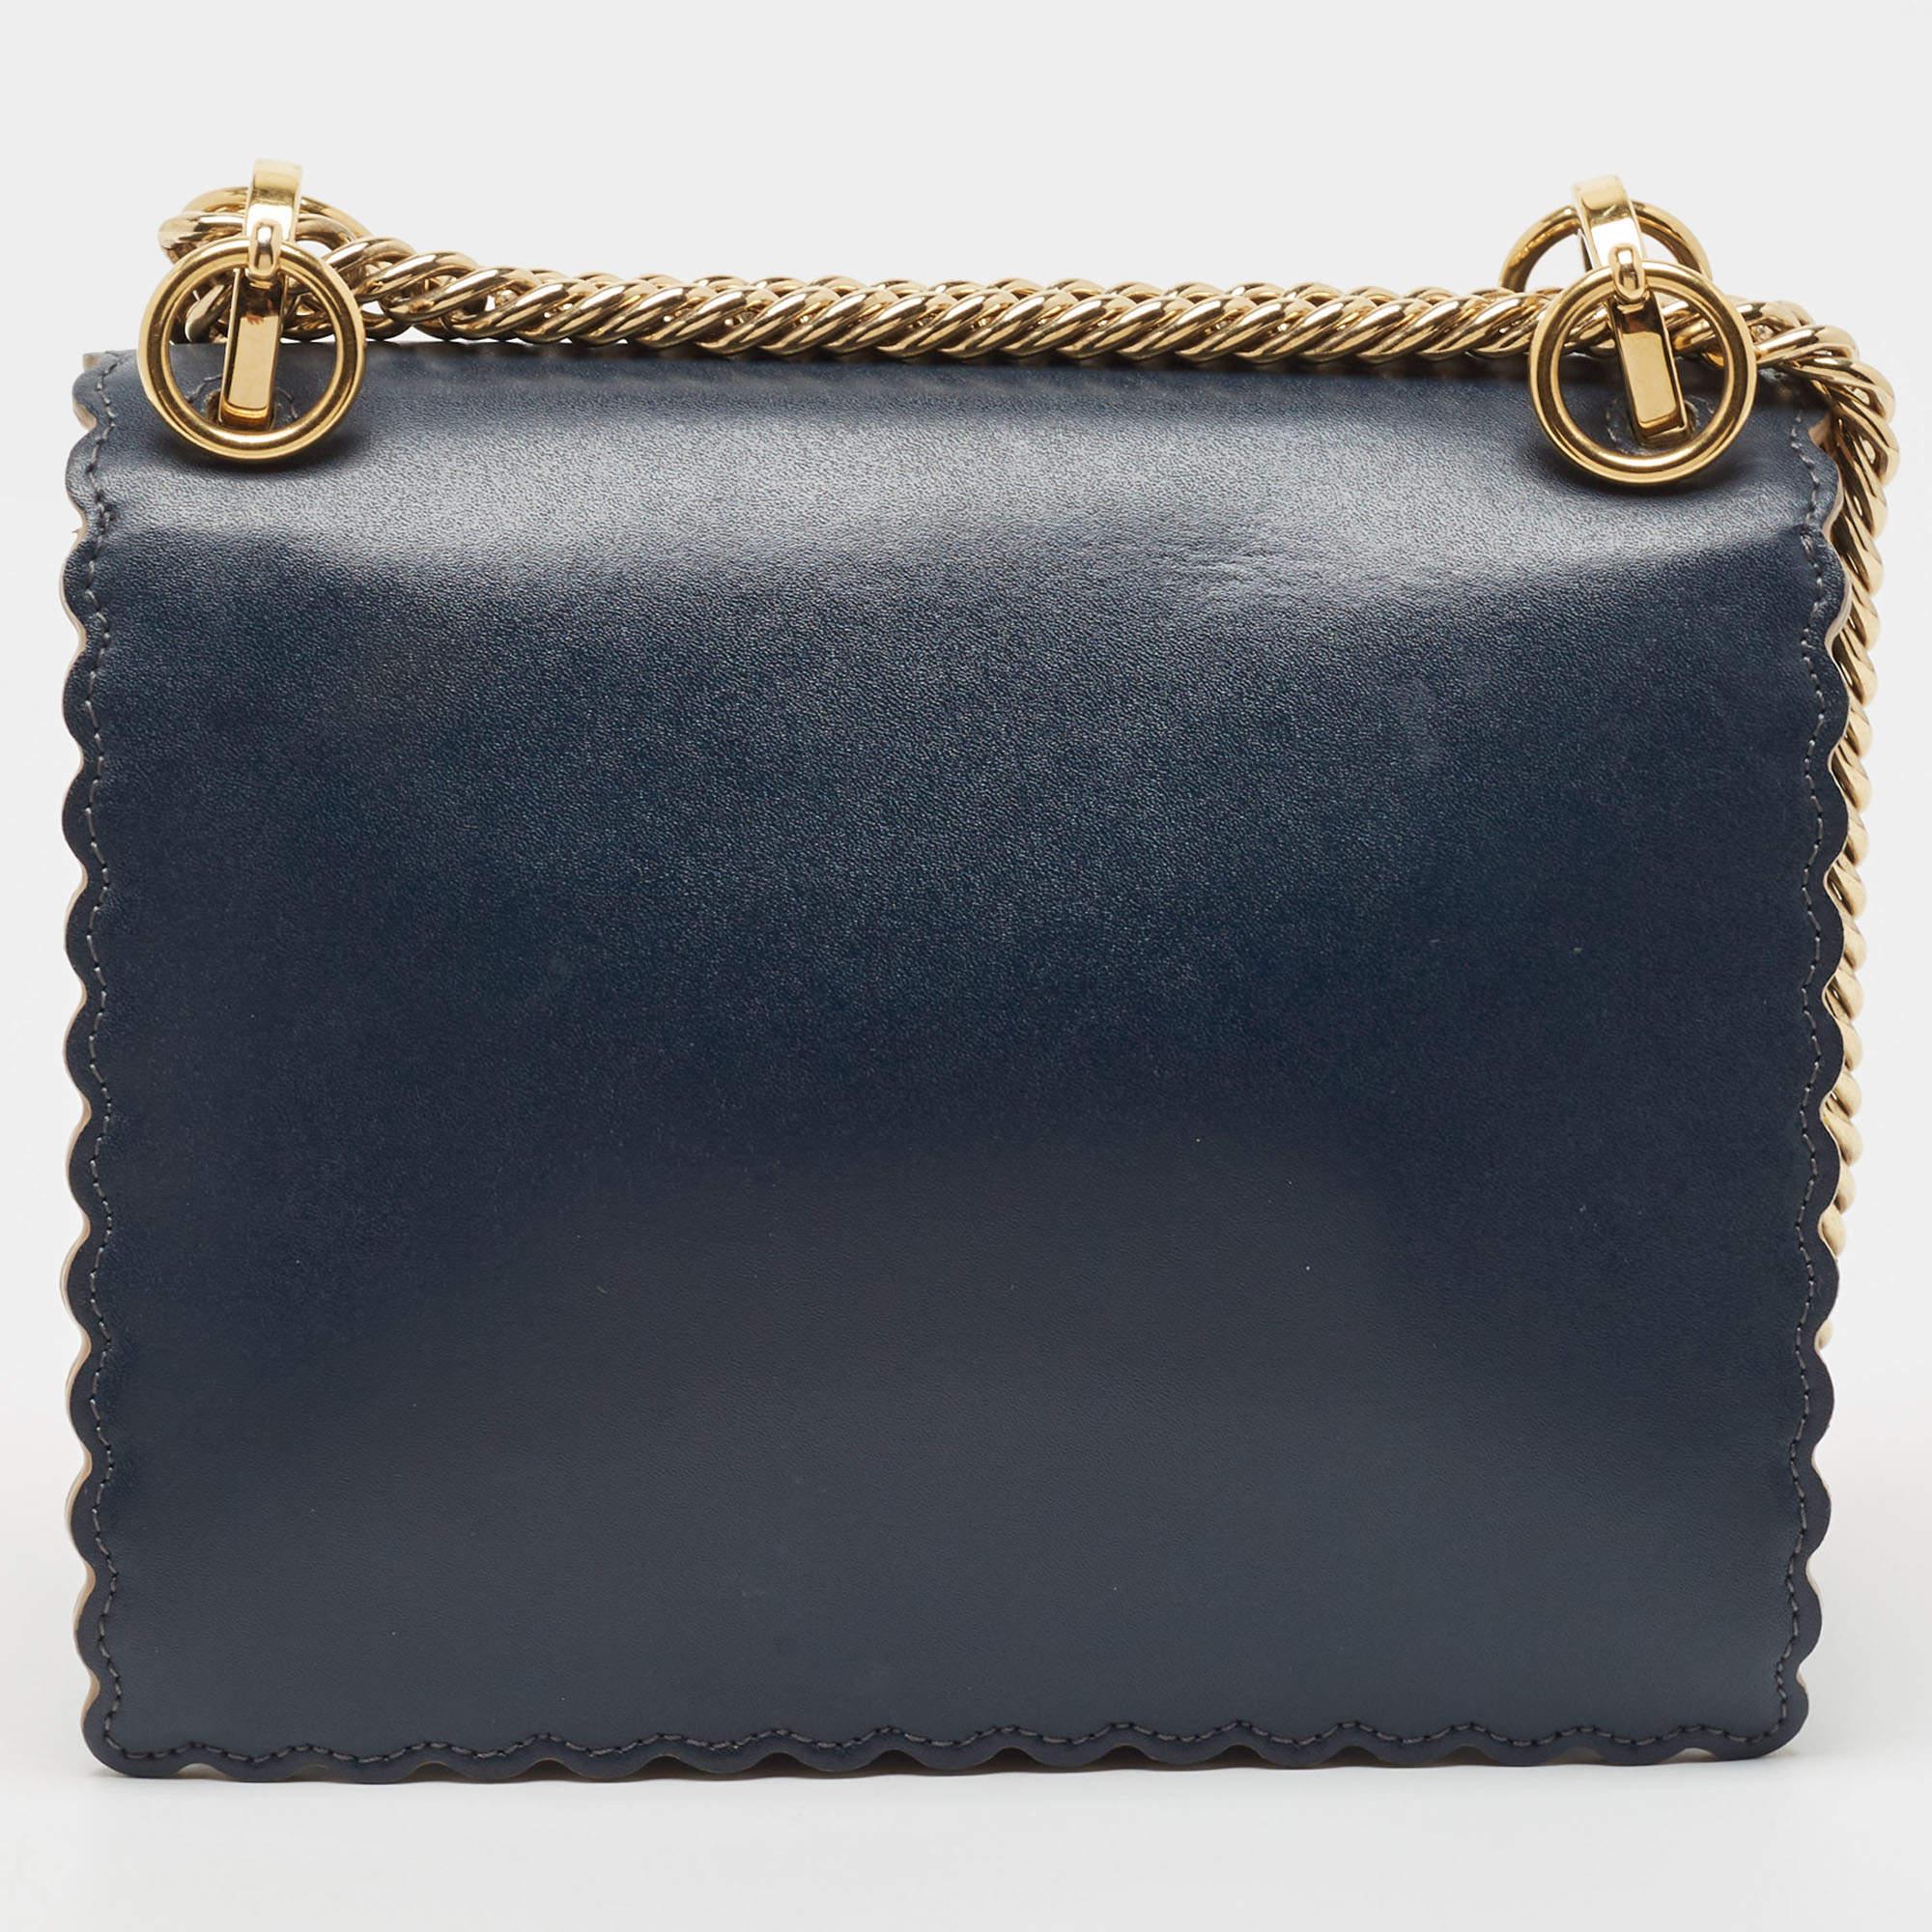 A classic handbag comes with the promise of enduring appeal, boosting your style time and again. This authentic Fendi shoulder bag is one such creation. It’s a fine purchase.

Includes: Info Card